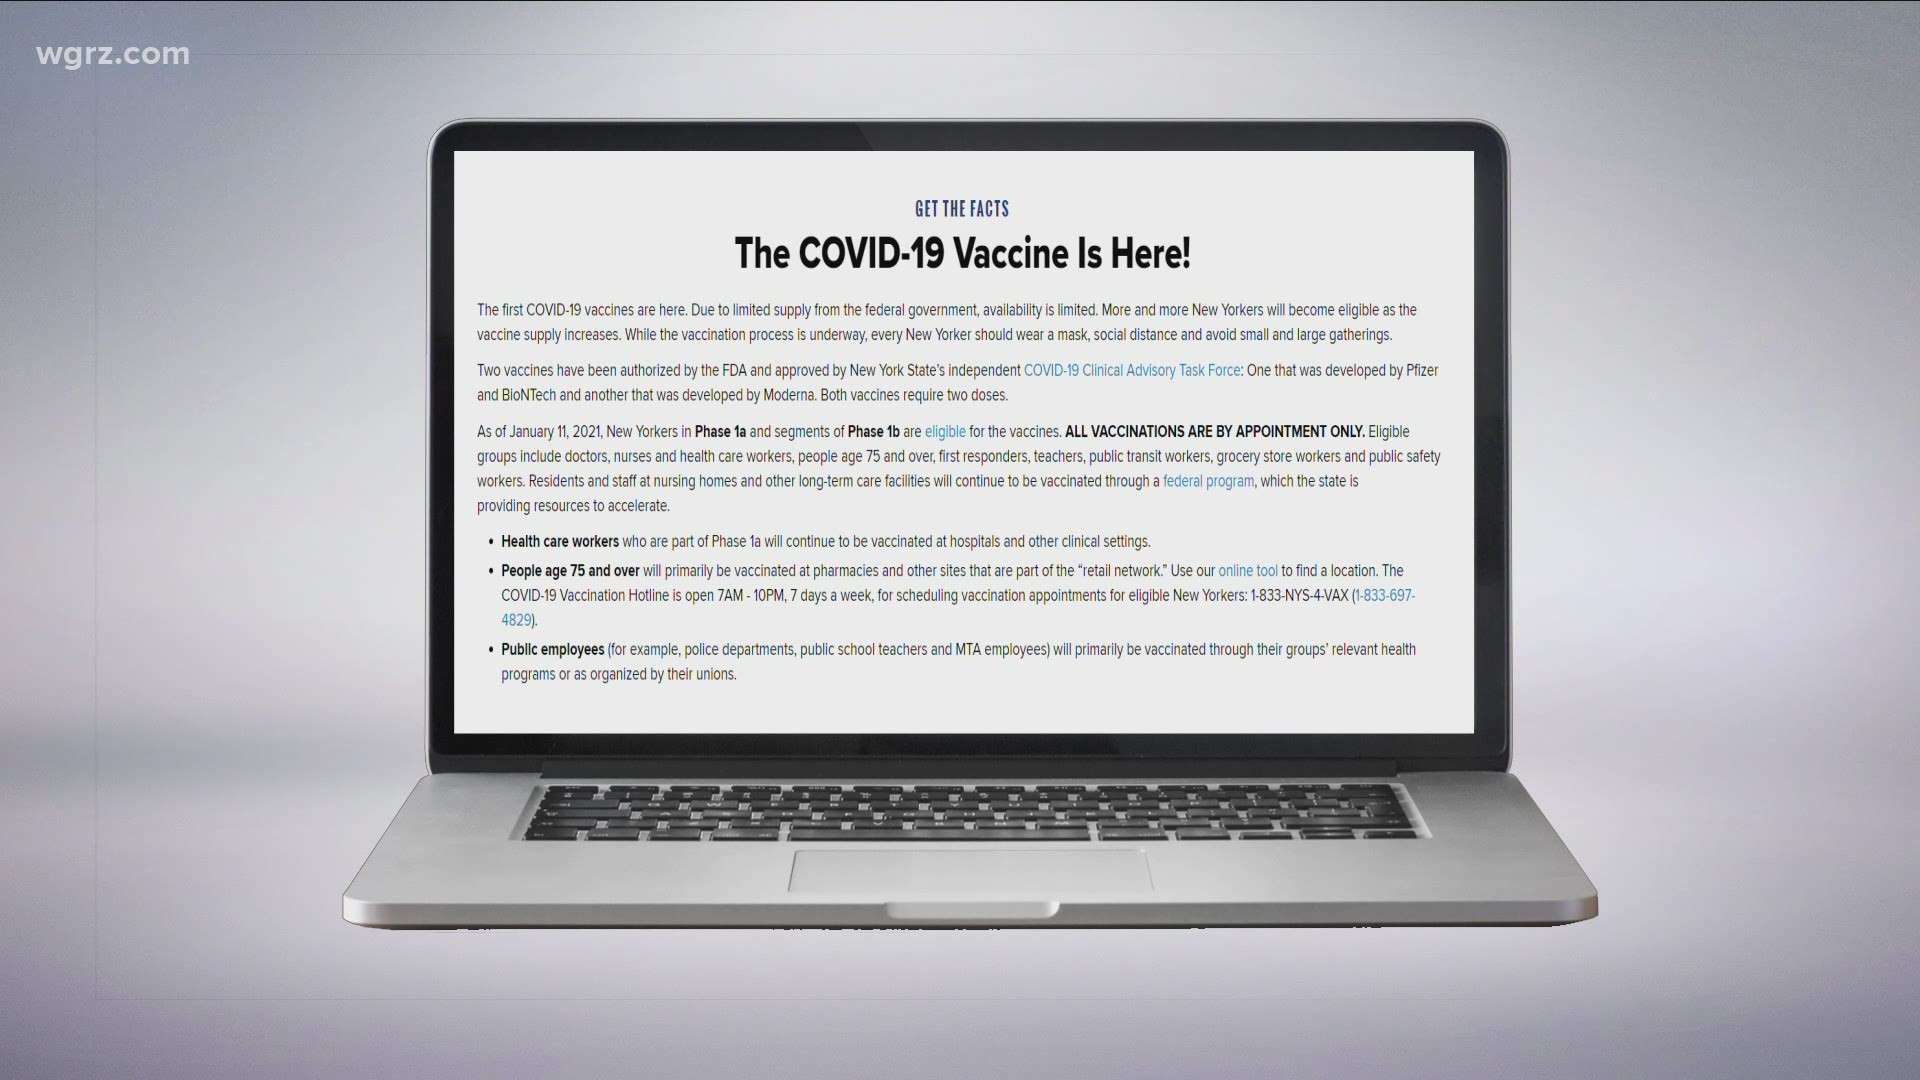 New York state's expansion of covid-19 vaccine eligibility kicked off today and many jumped at the opportunity.